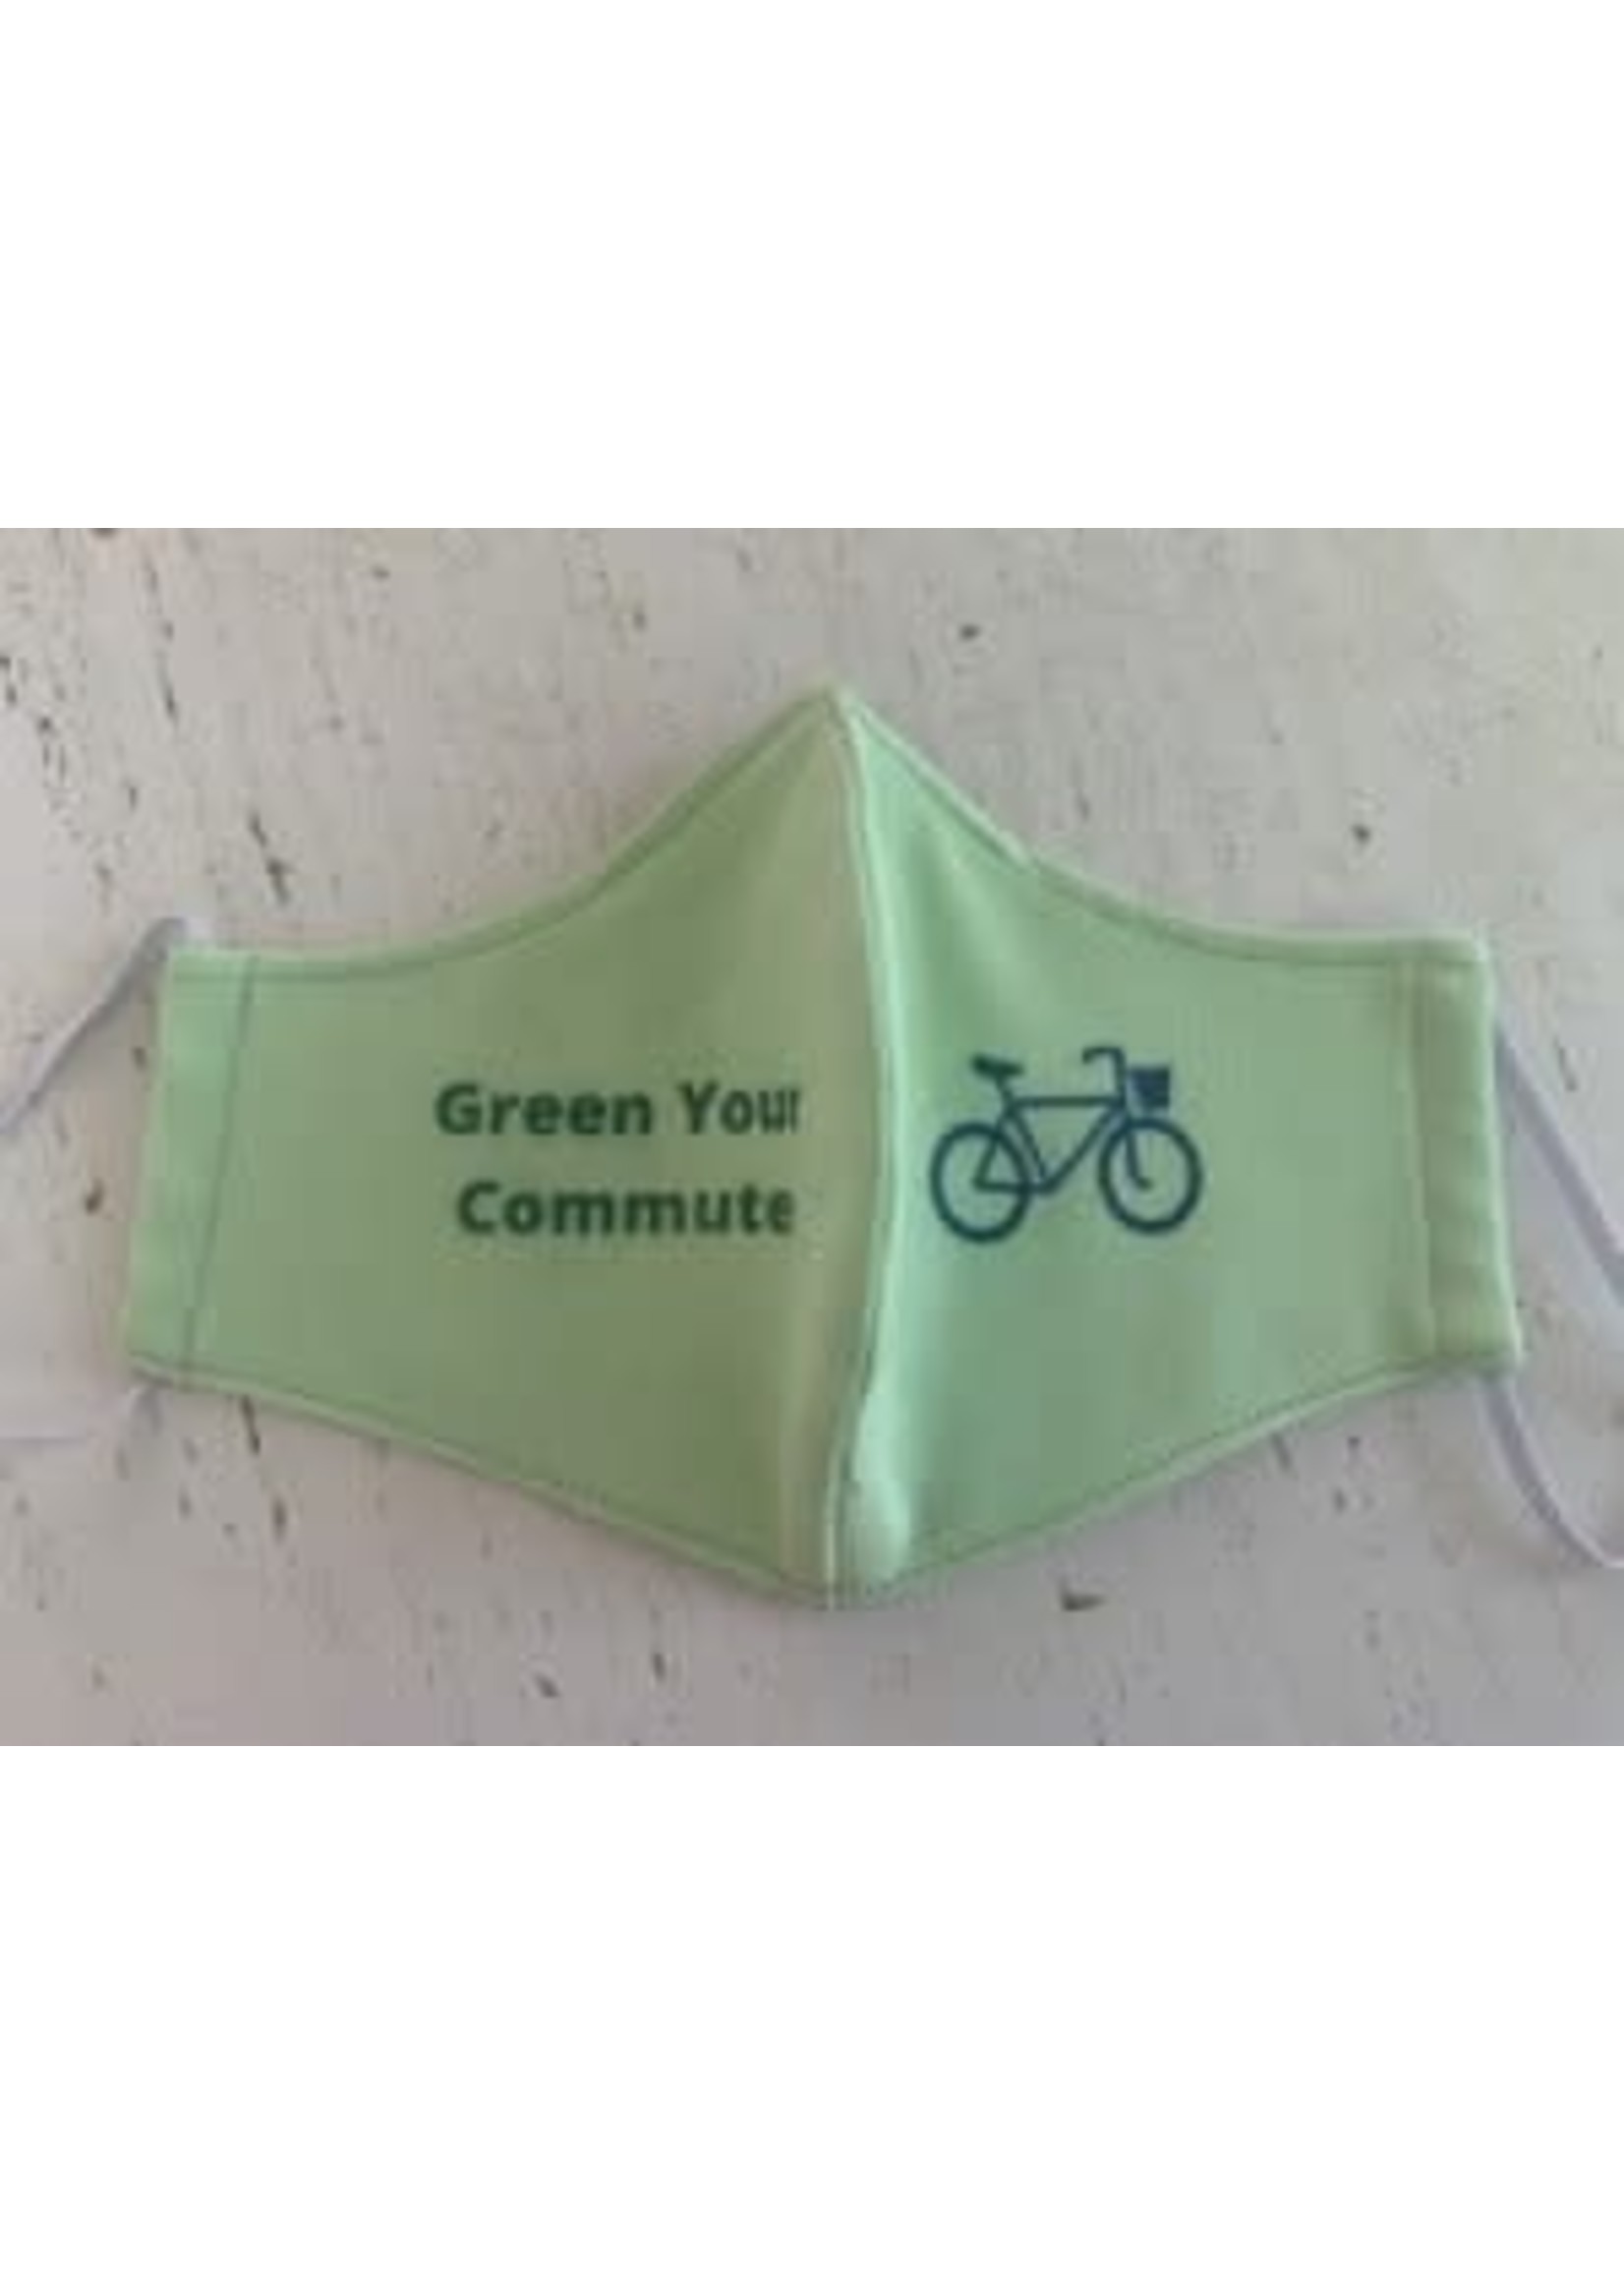 Green your commute mask